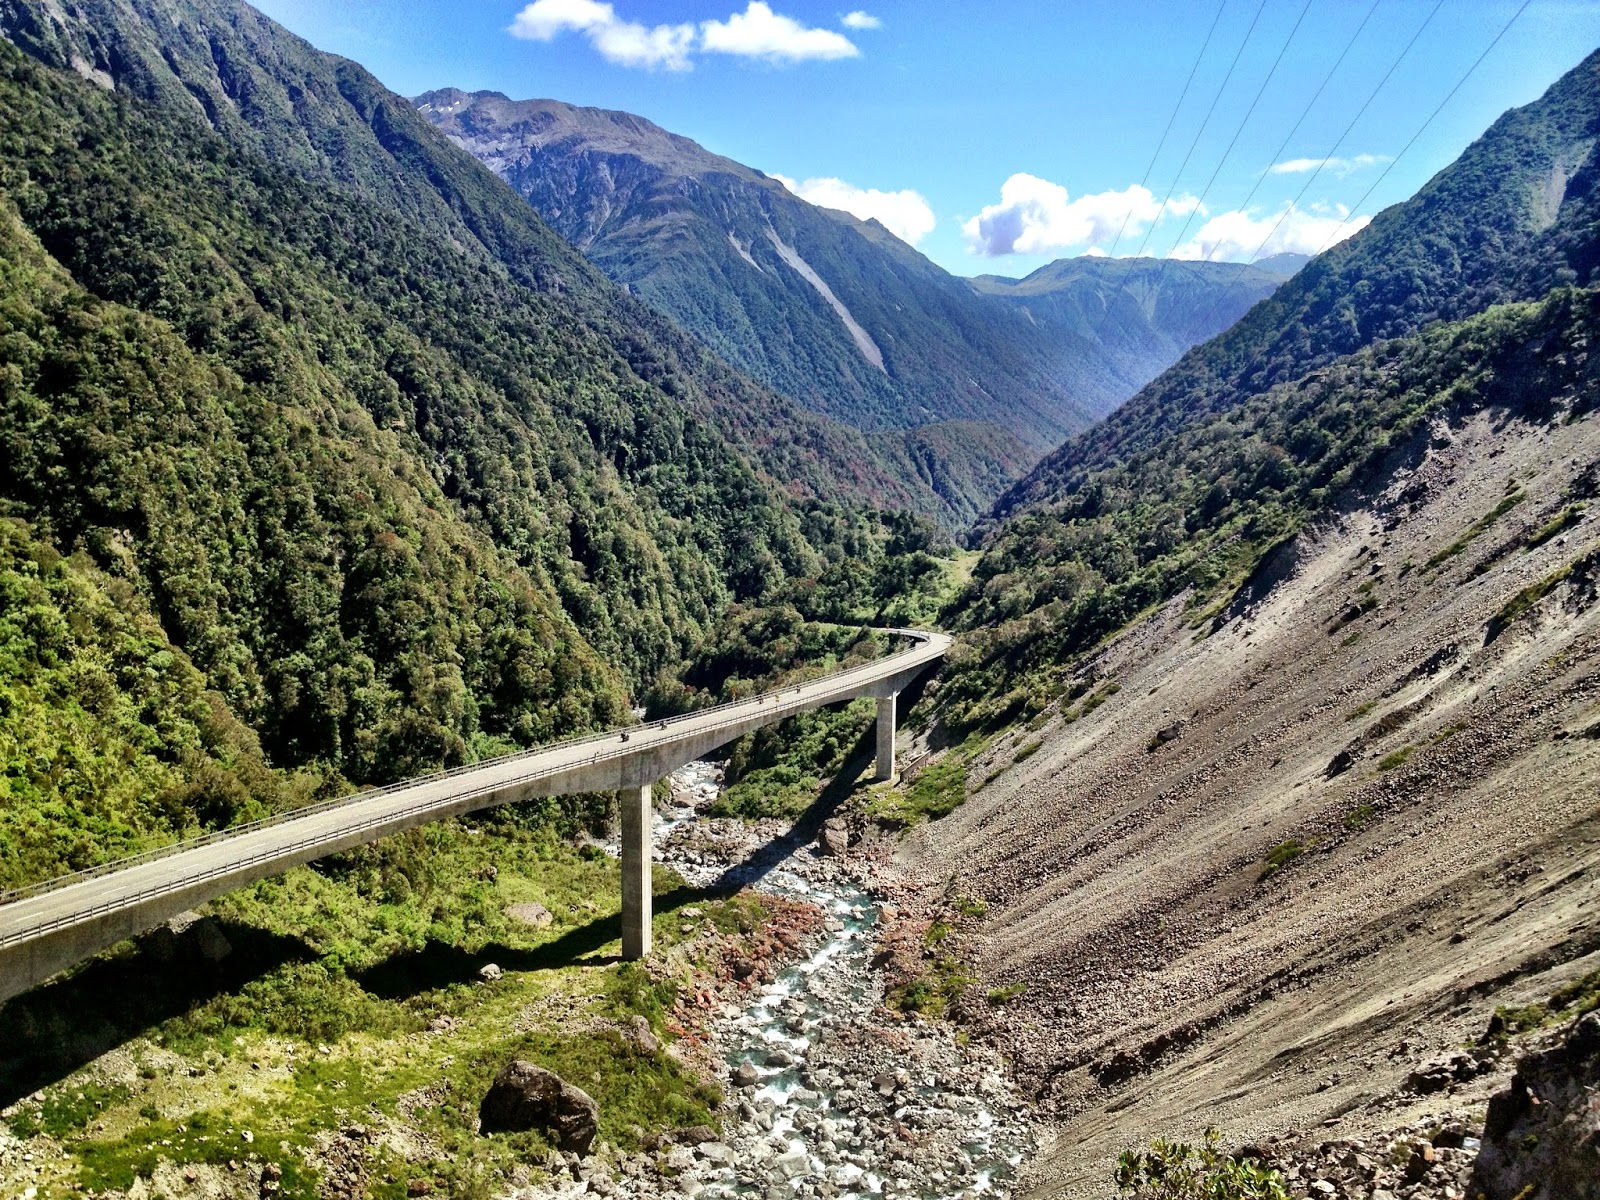 Part of the road over Arthurs Pass, New Zealand